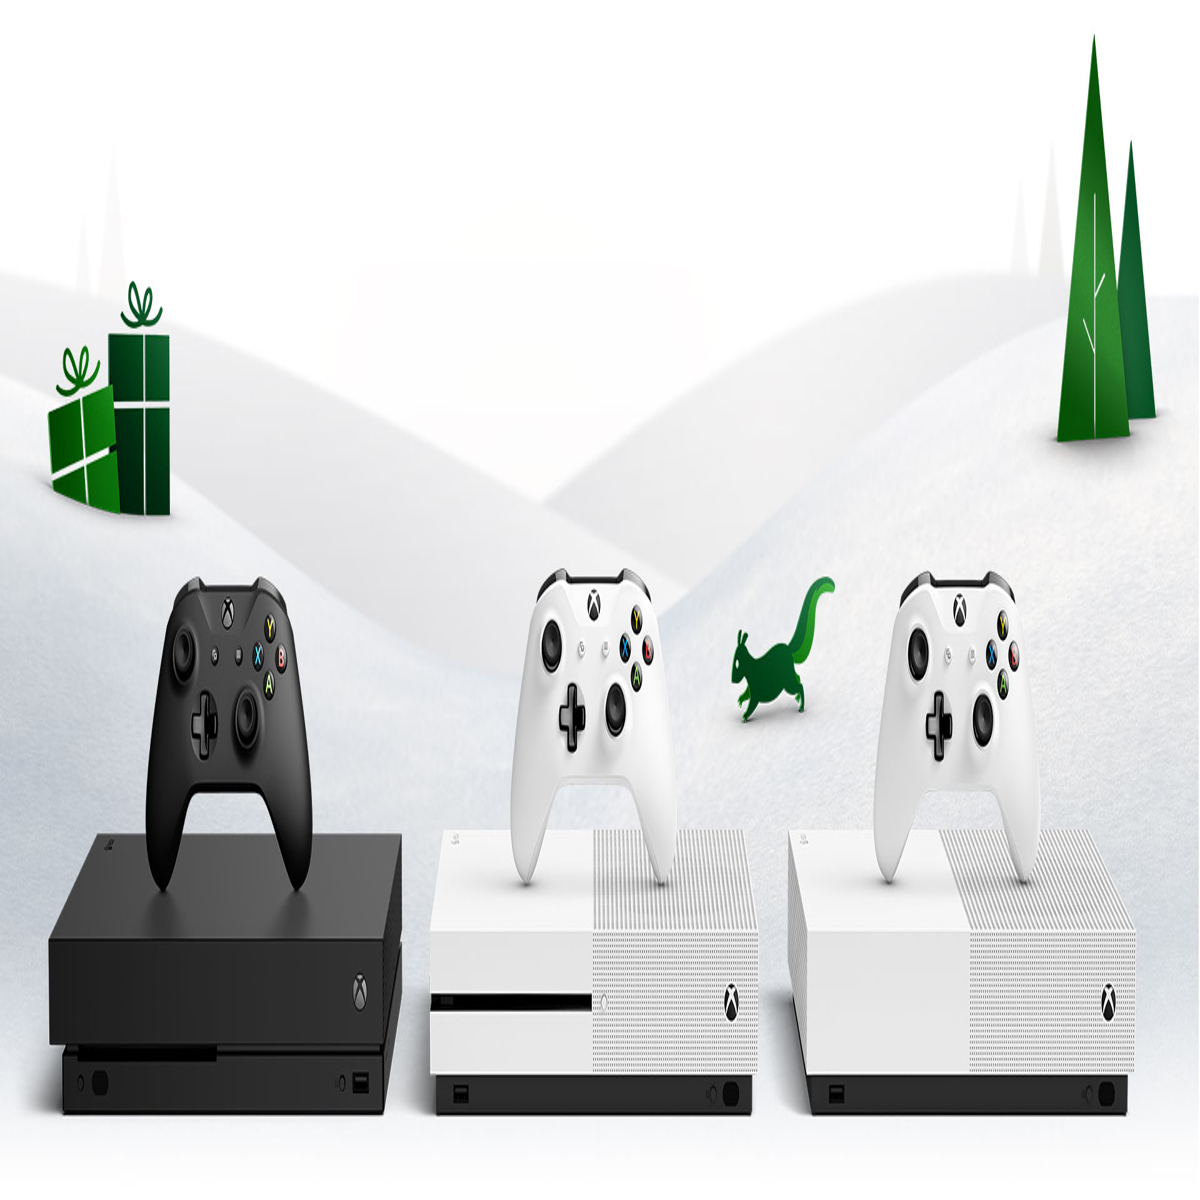 Beskrive Vær stille Gym Xbox Gift Guide 2019: Xbox One consoles, top games, accessories, merch and  more | Eurogamer.net